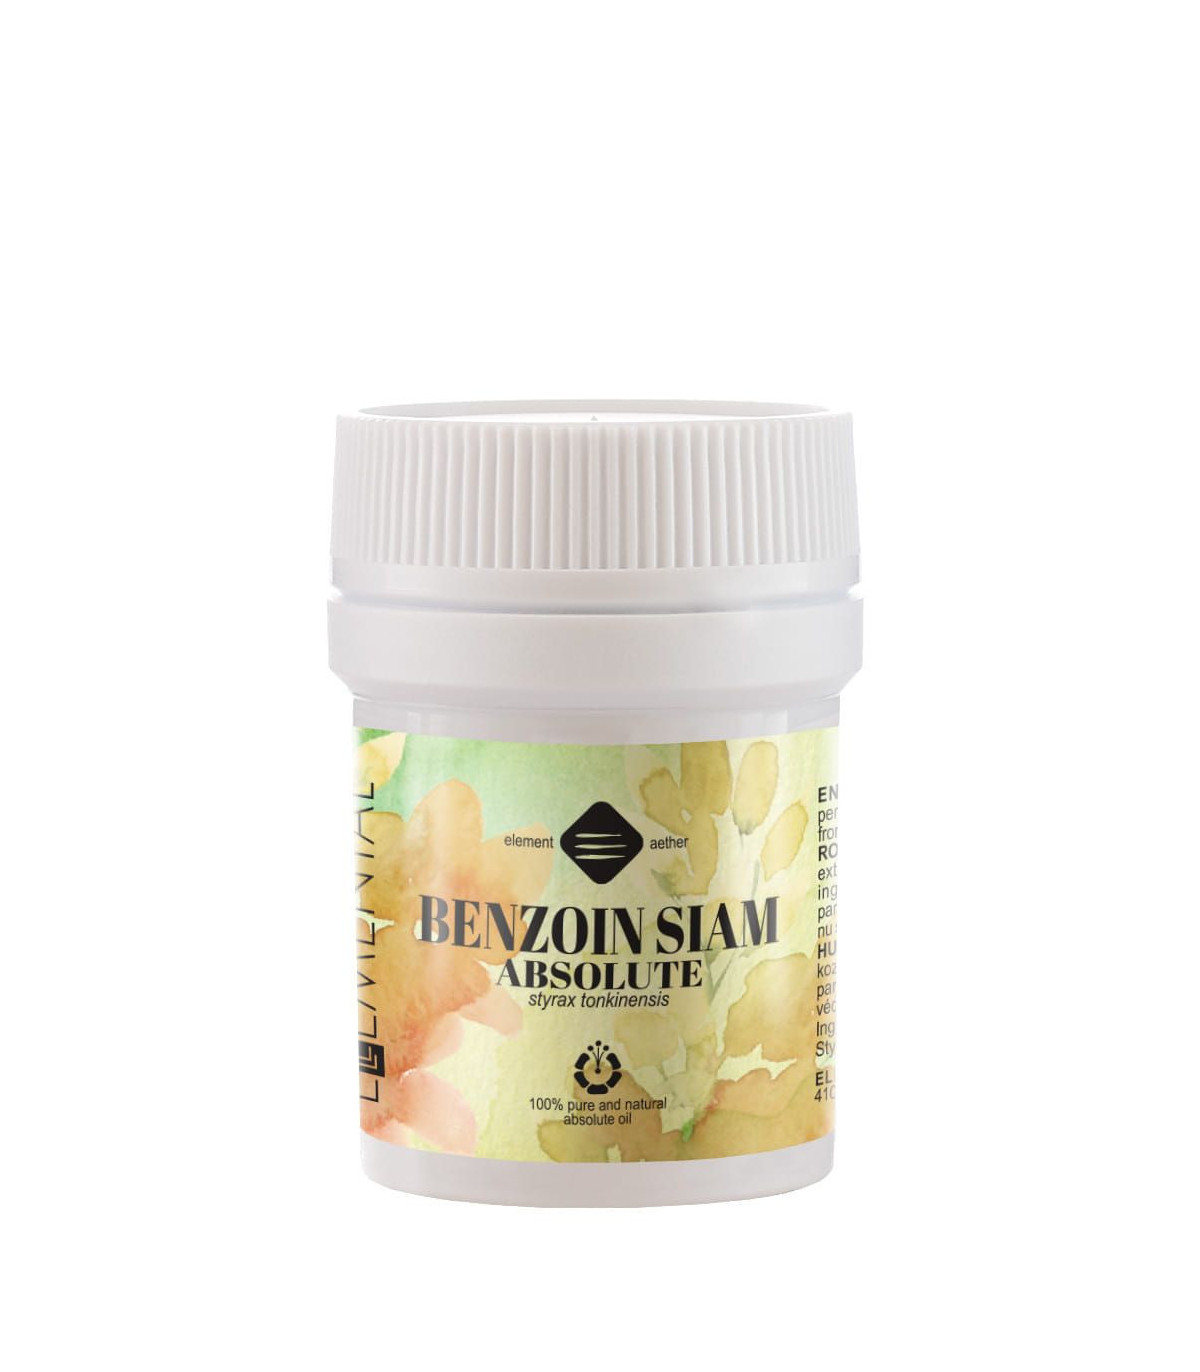 Benzoin Siam absolute